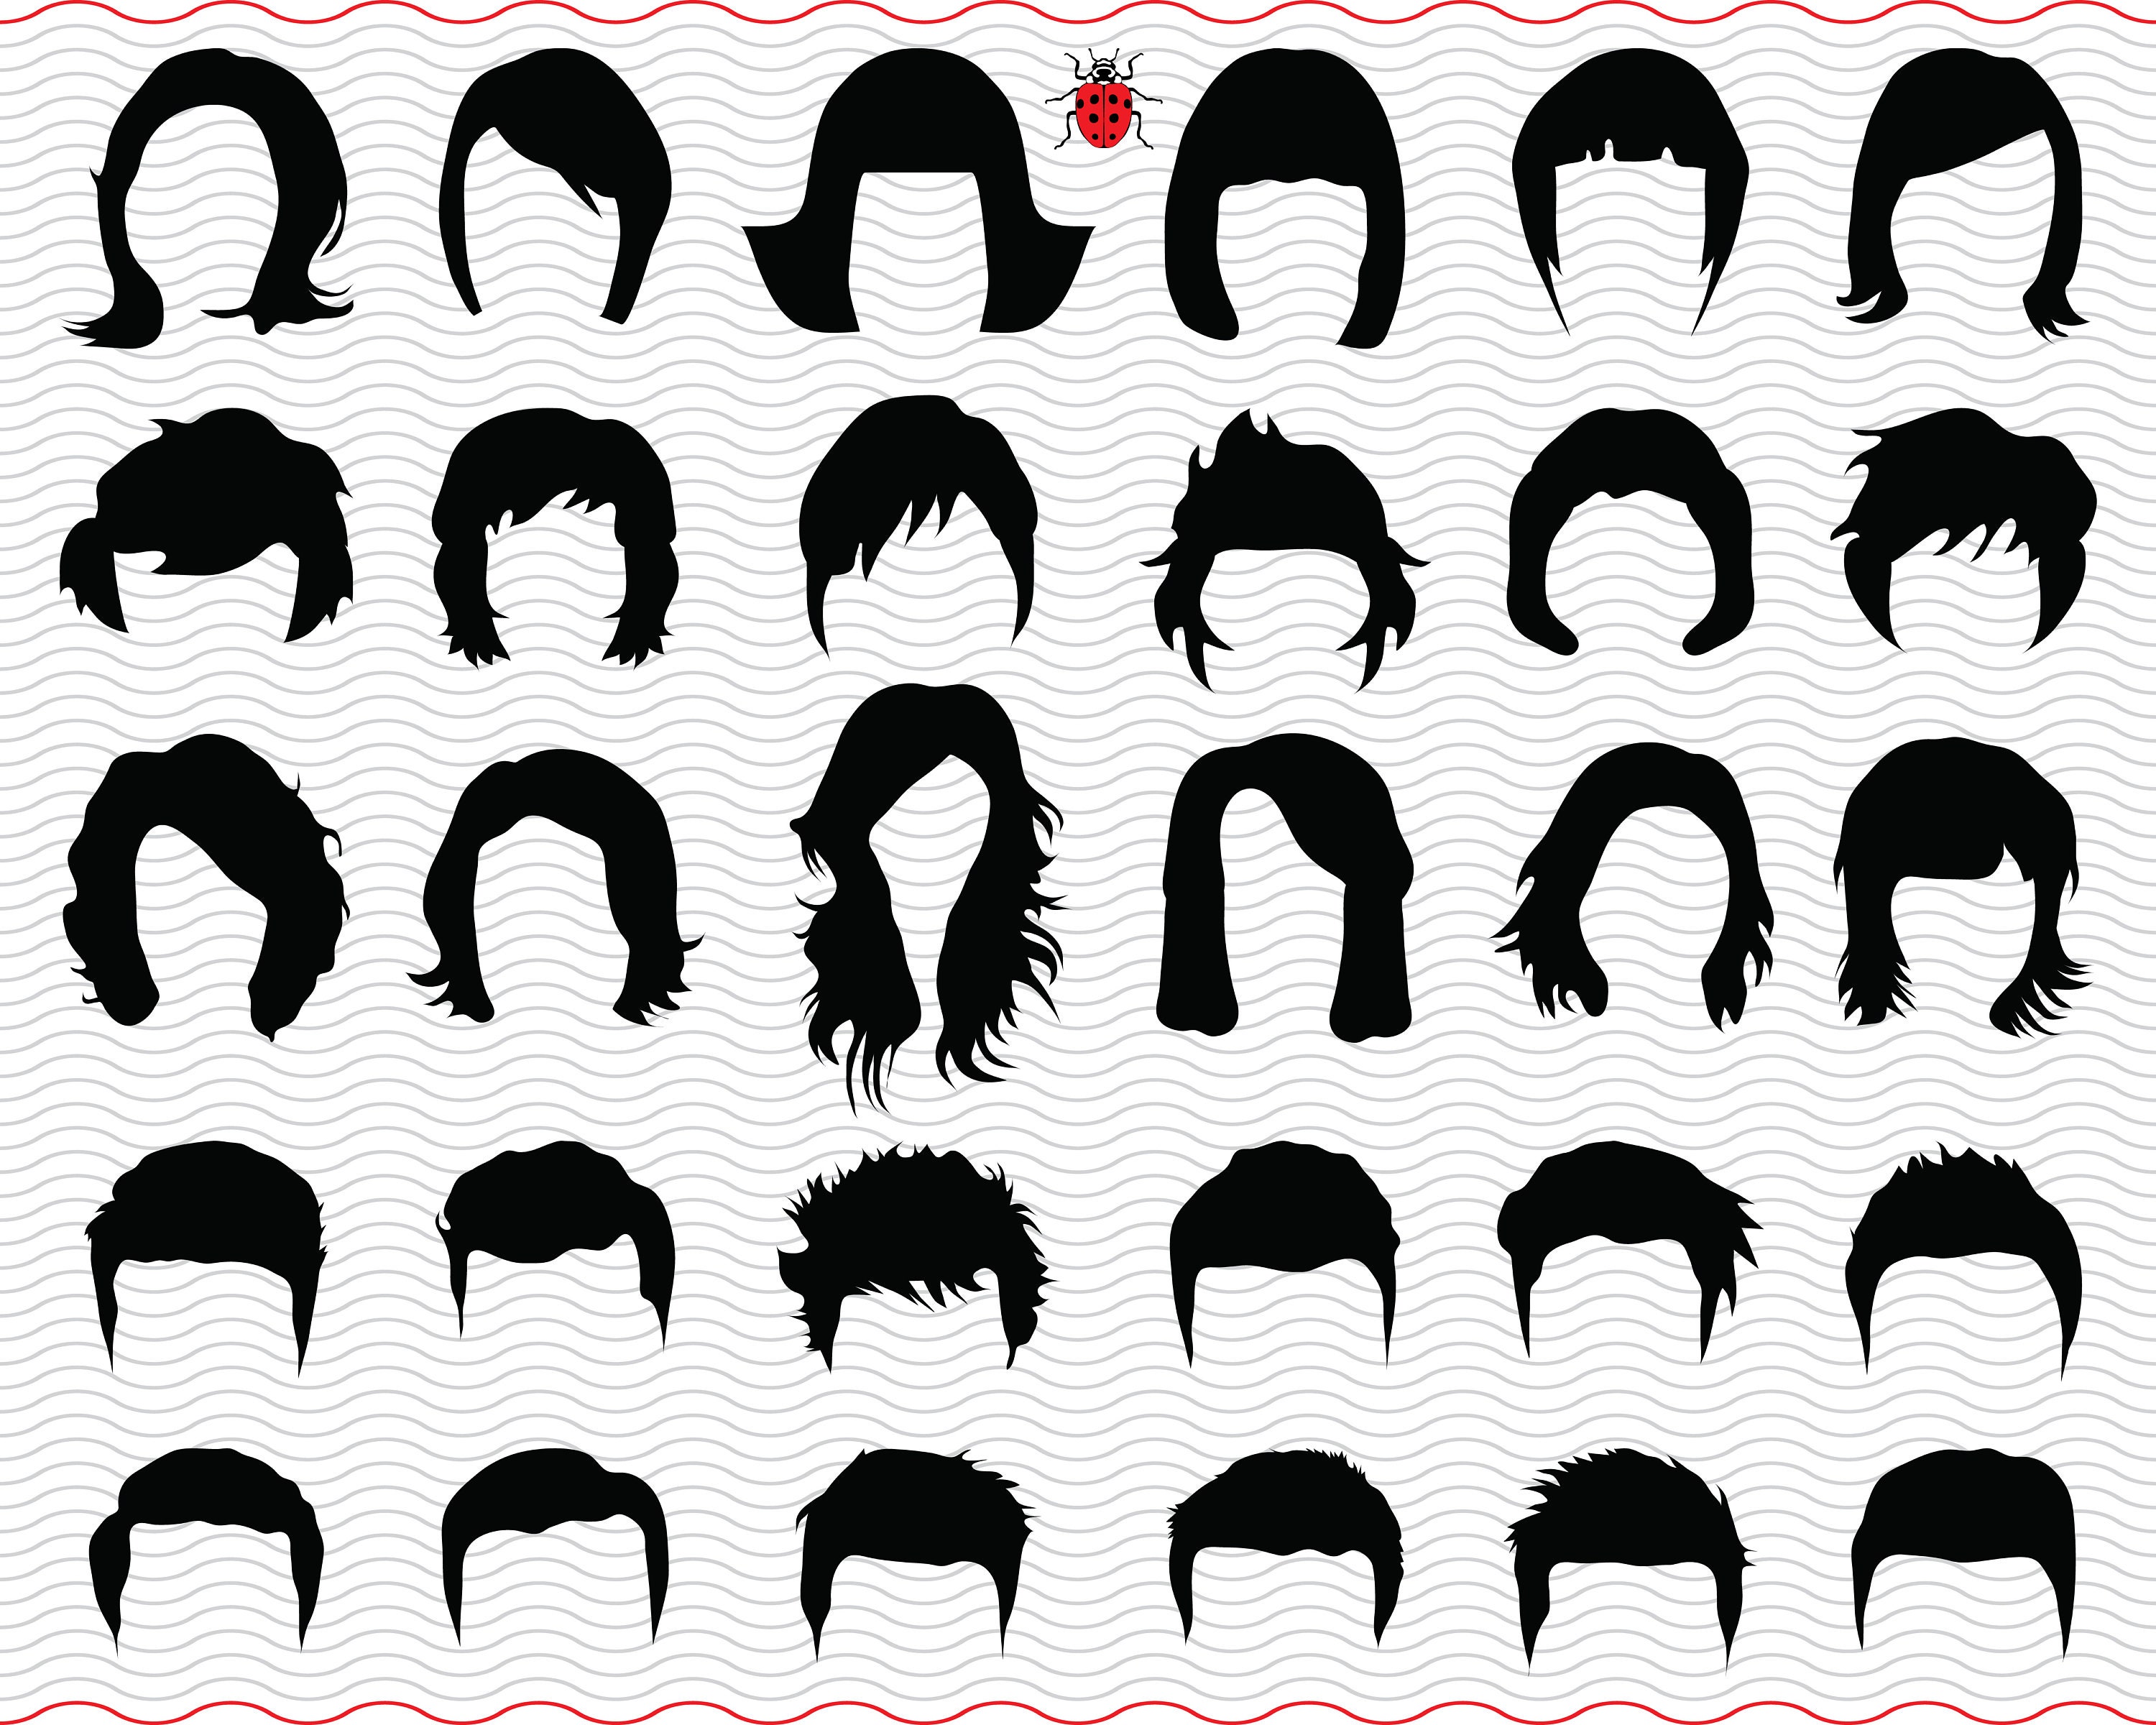 SVG Hairstyles Black Silhouettes Digital Clipart Files Eps - Etsy